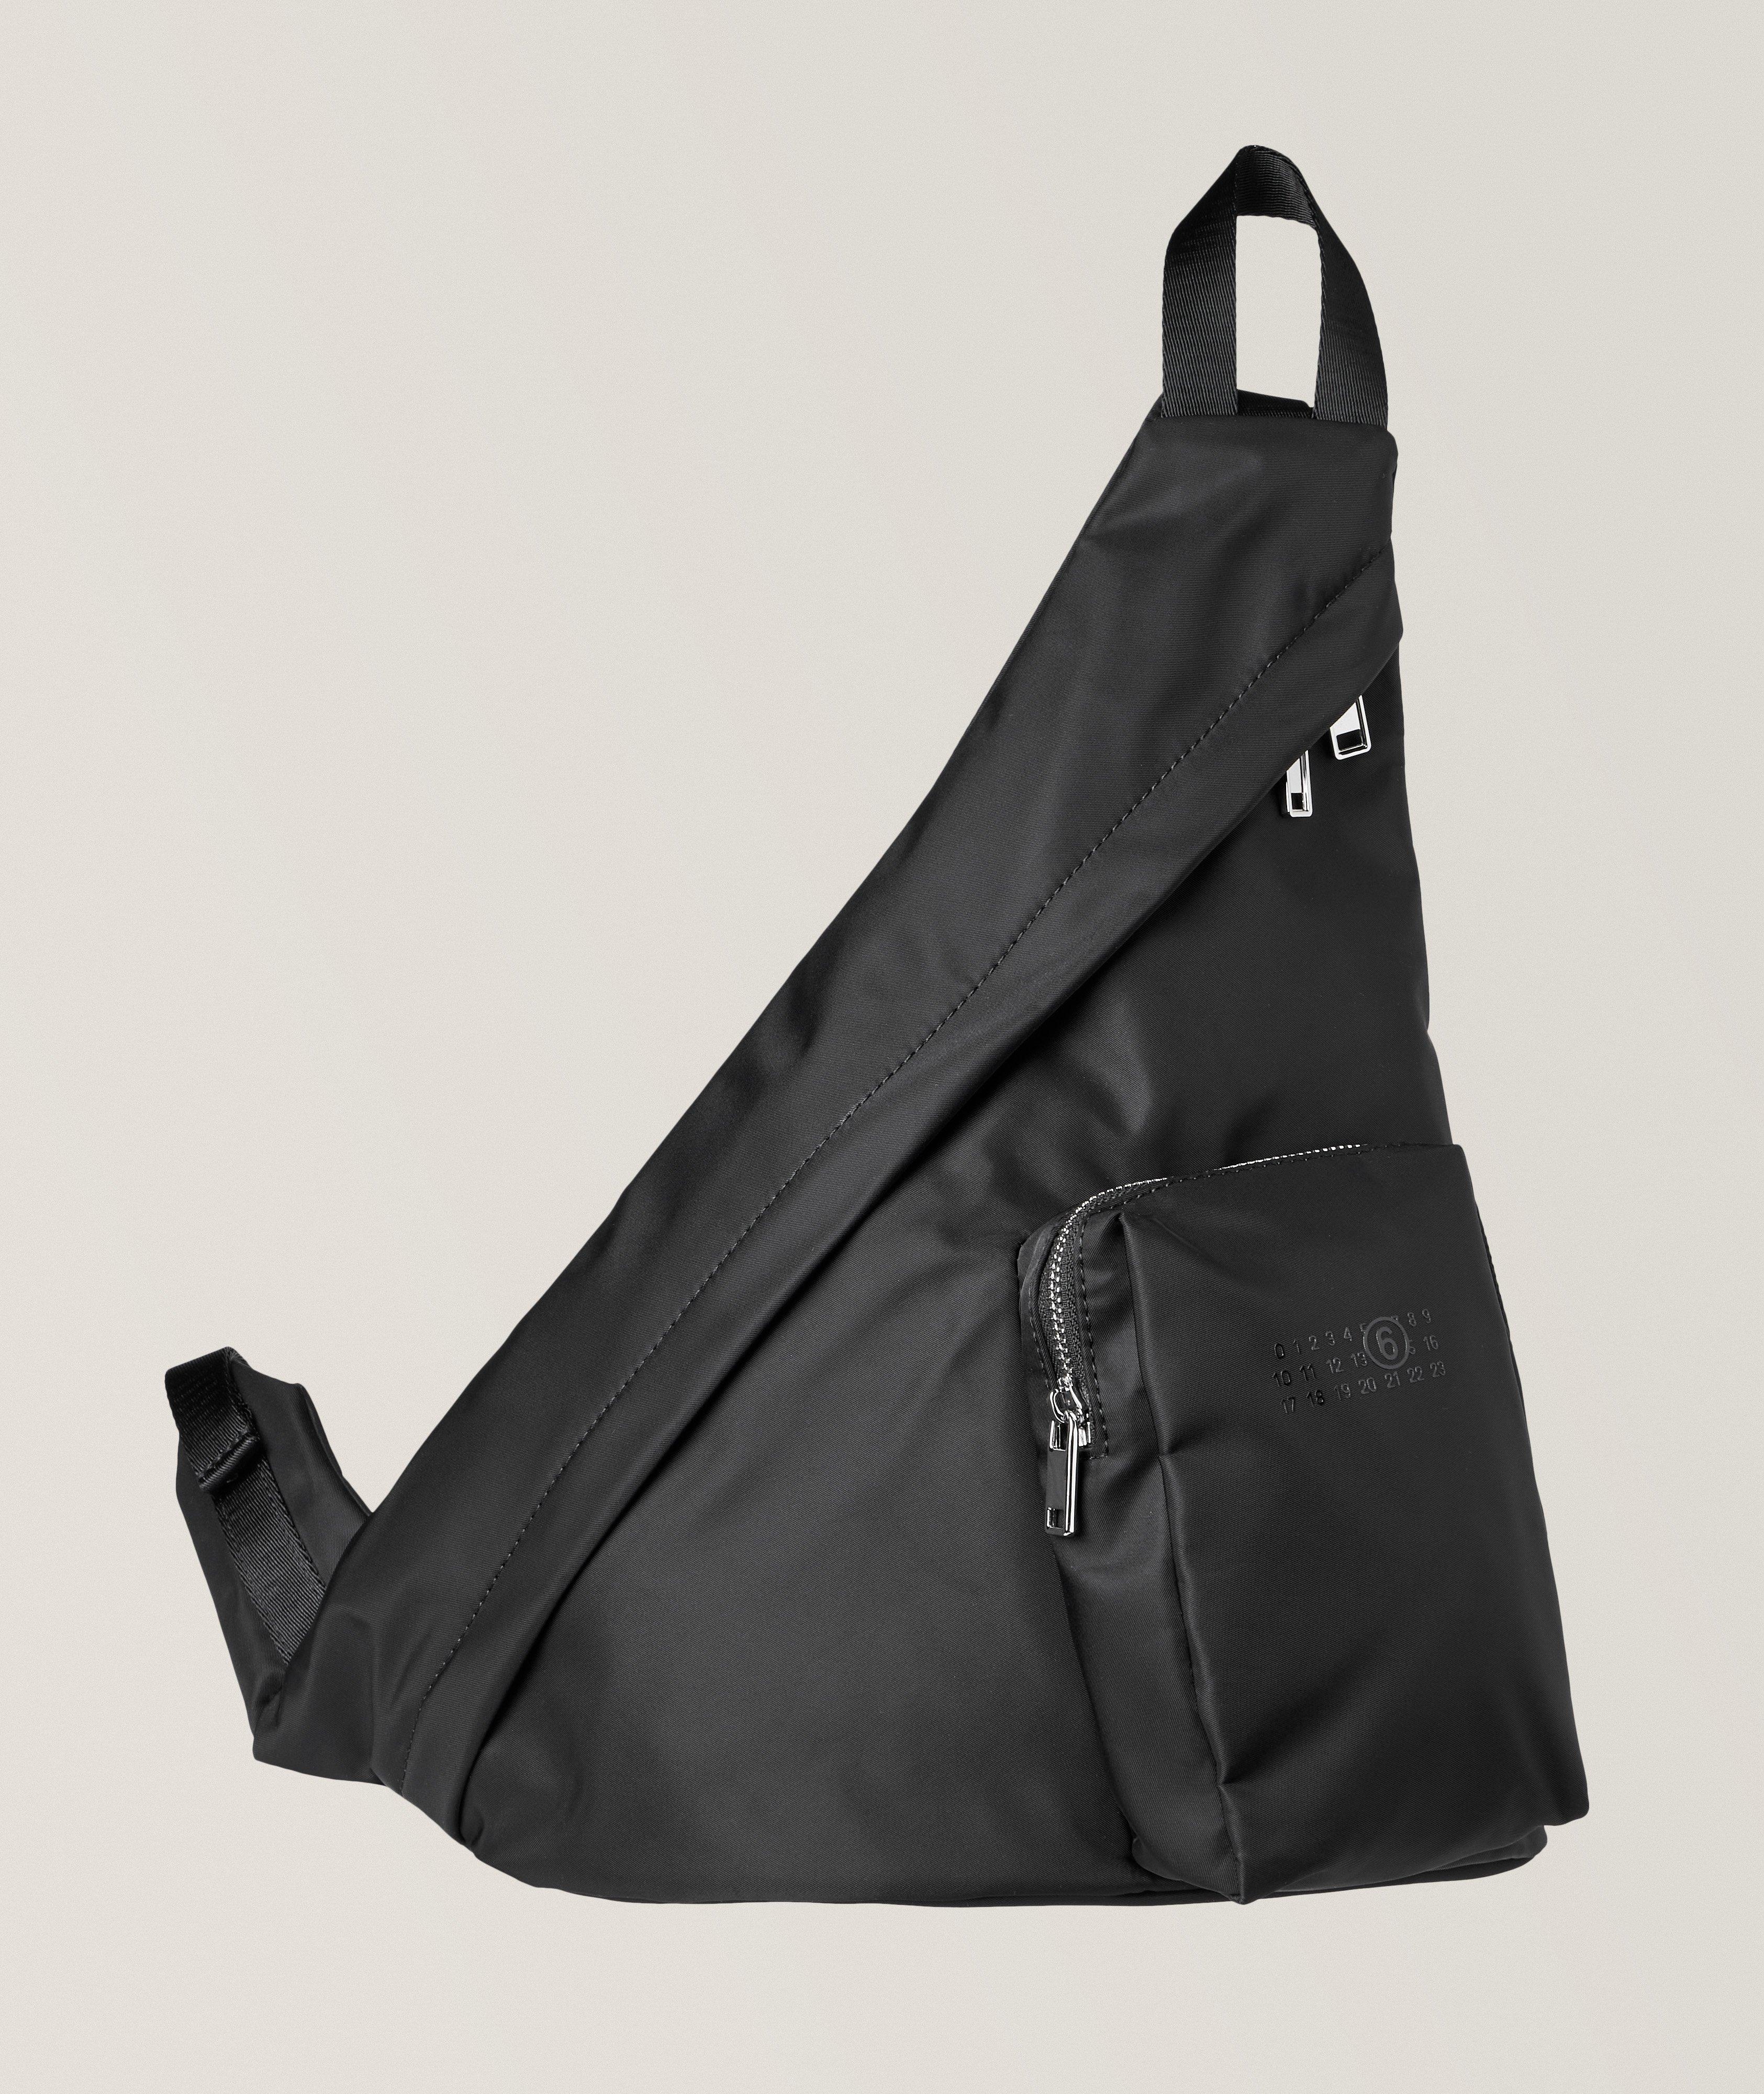 Triangle Technical Fabric Sling Bag  image 0